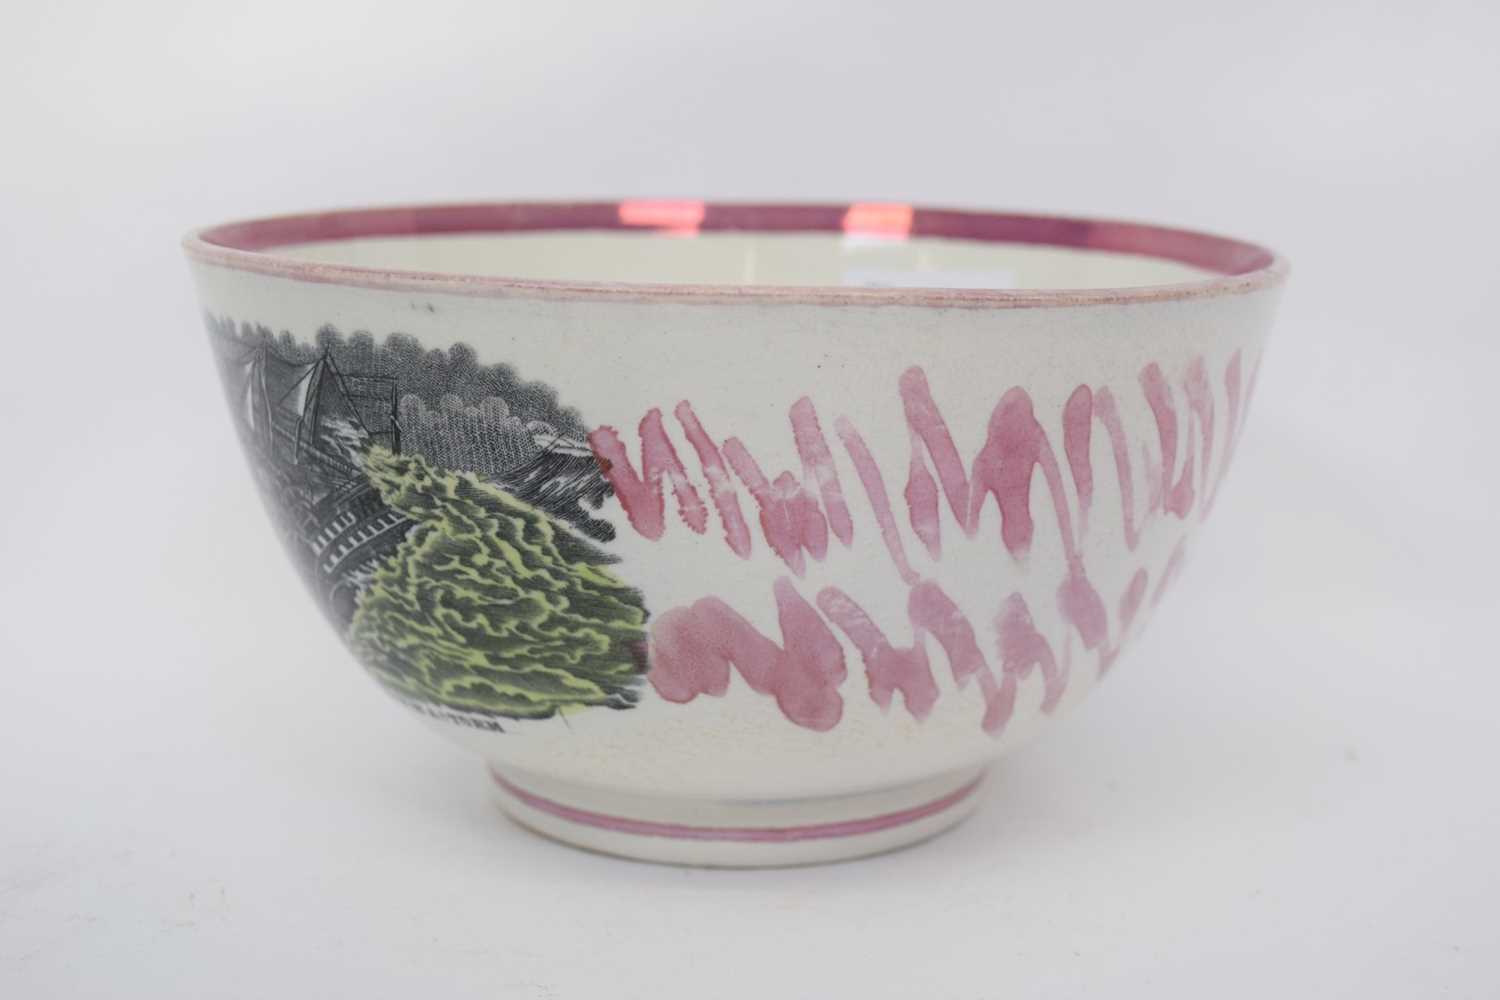 Sunderland lustre bowl with a view of Sunderland Bridge and the Agamemnon in a storm verso, 19cm